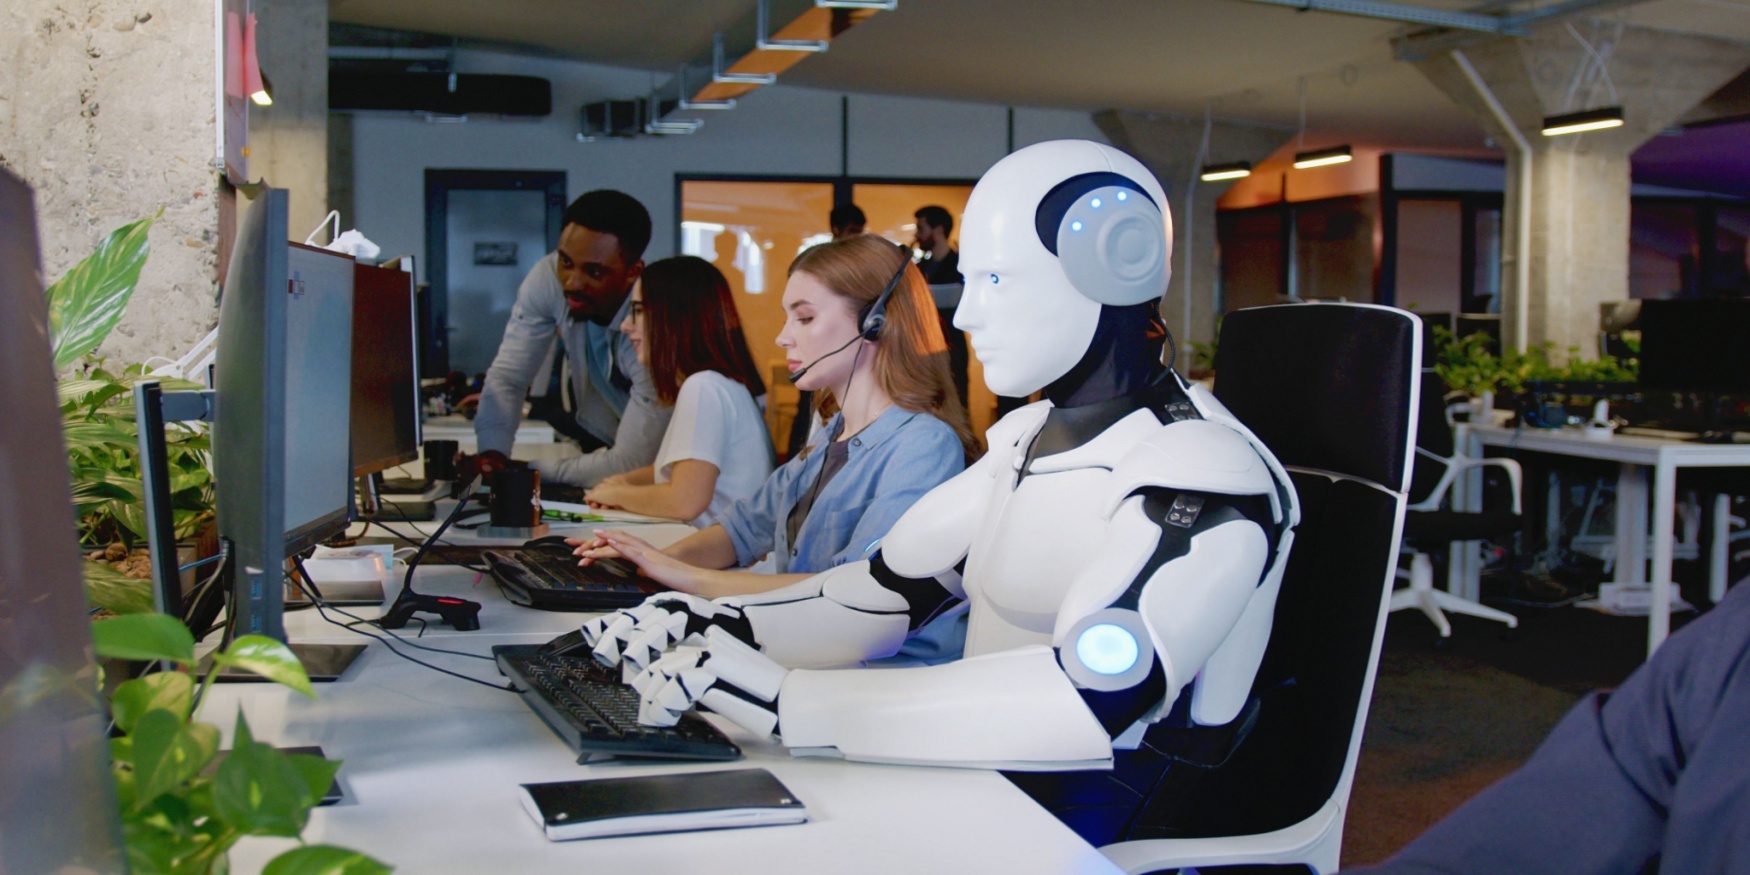 Robot working at computer on Microsoft Dynamics Copilot among people in an office